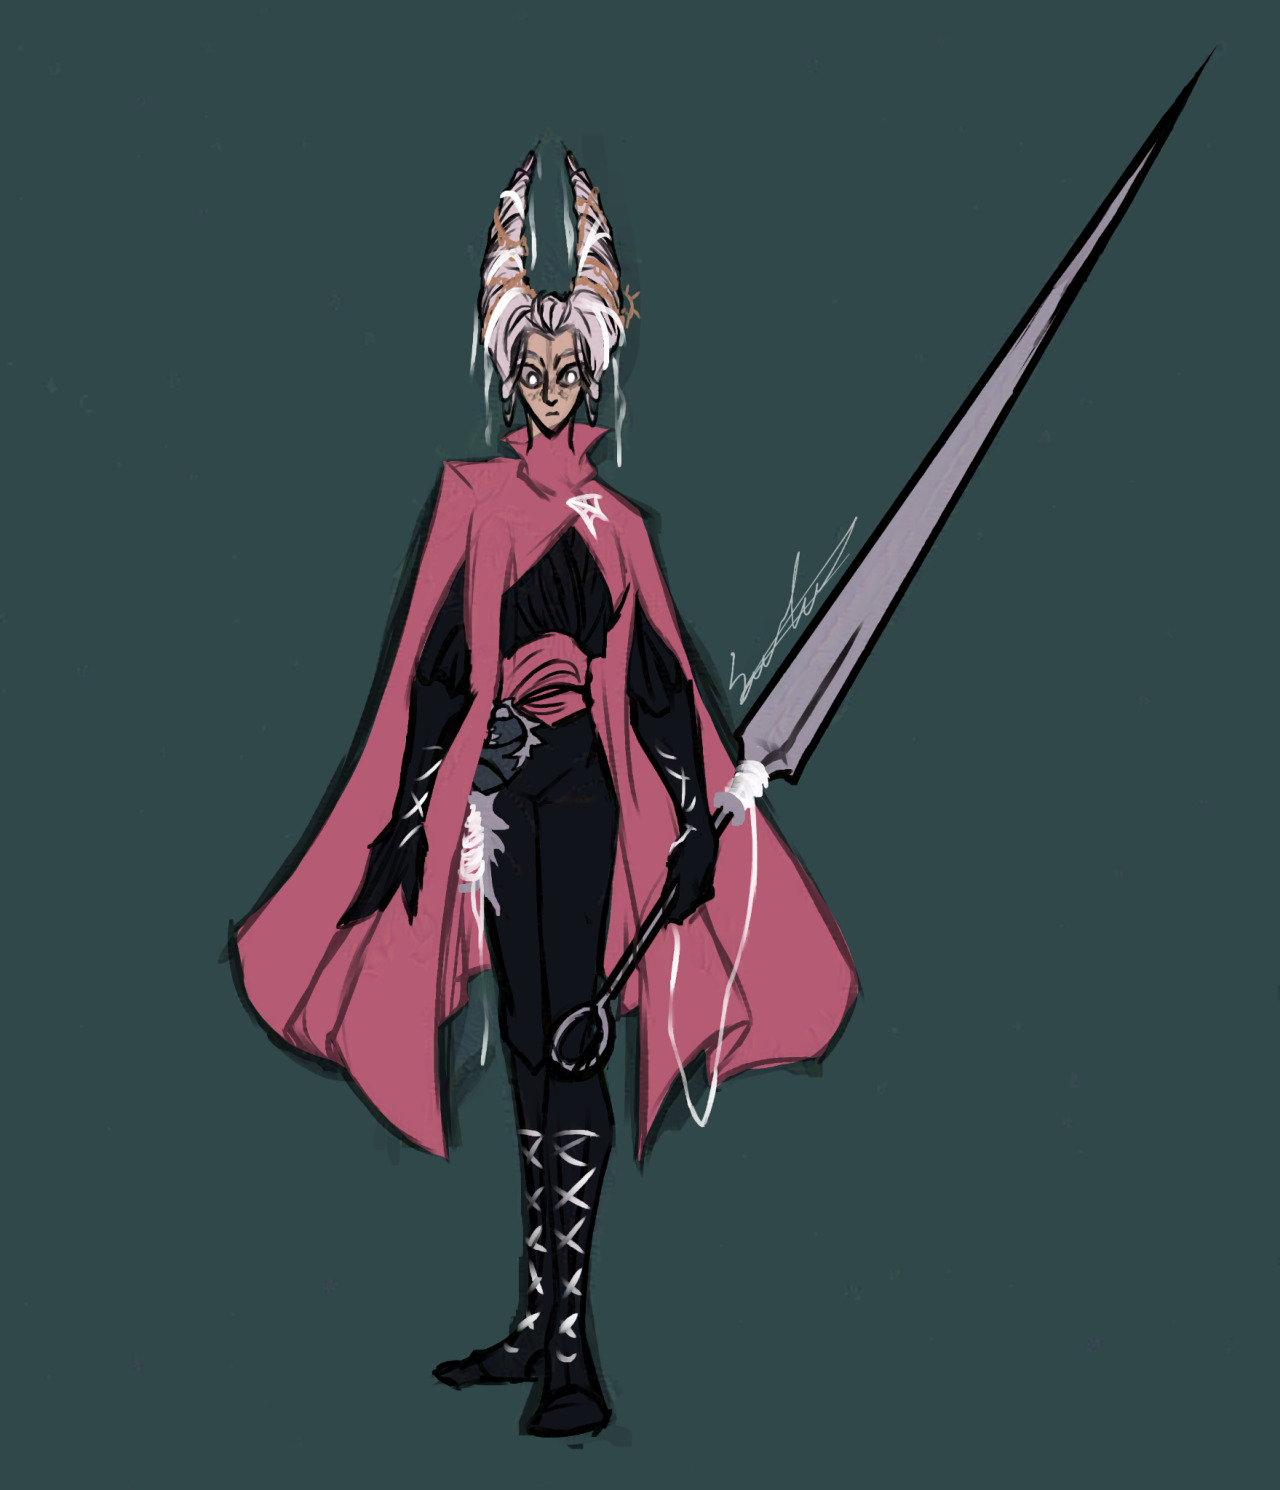 This drawing is a reimagining of Hornet (from hollow knight) as a human. A simple coloured sketch depicting a pale, slim, feminine character with white hair styled in the shape of horns and decorated with bronze chains. She's wearing a black outfit with white silk stitches on the arms and legs and a big red cape, she carries a decorated hunter's bag with her as well as a spool of silk threads on her belt. Her eyes are white with freckles around her nose and cheeks. She is holding her weapon (a long needle) in her left hand.